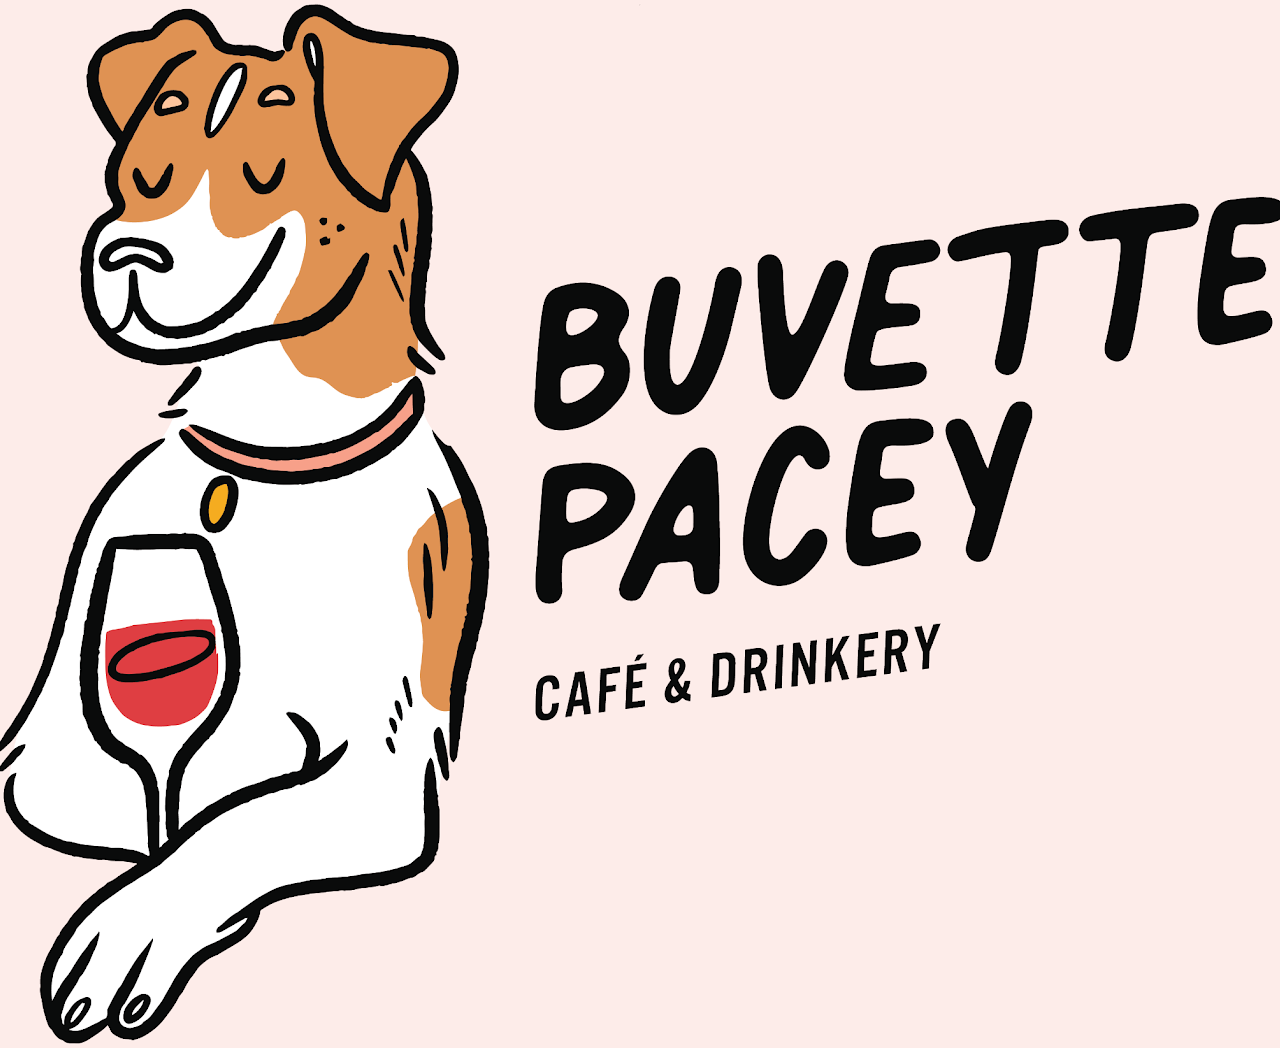 Buvette Pacey